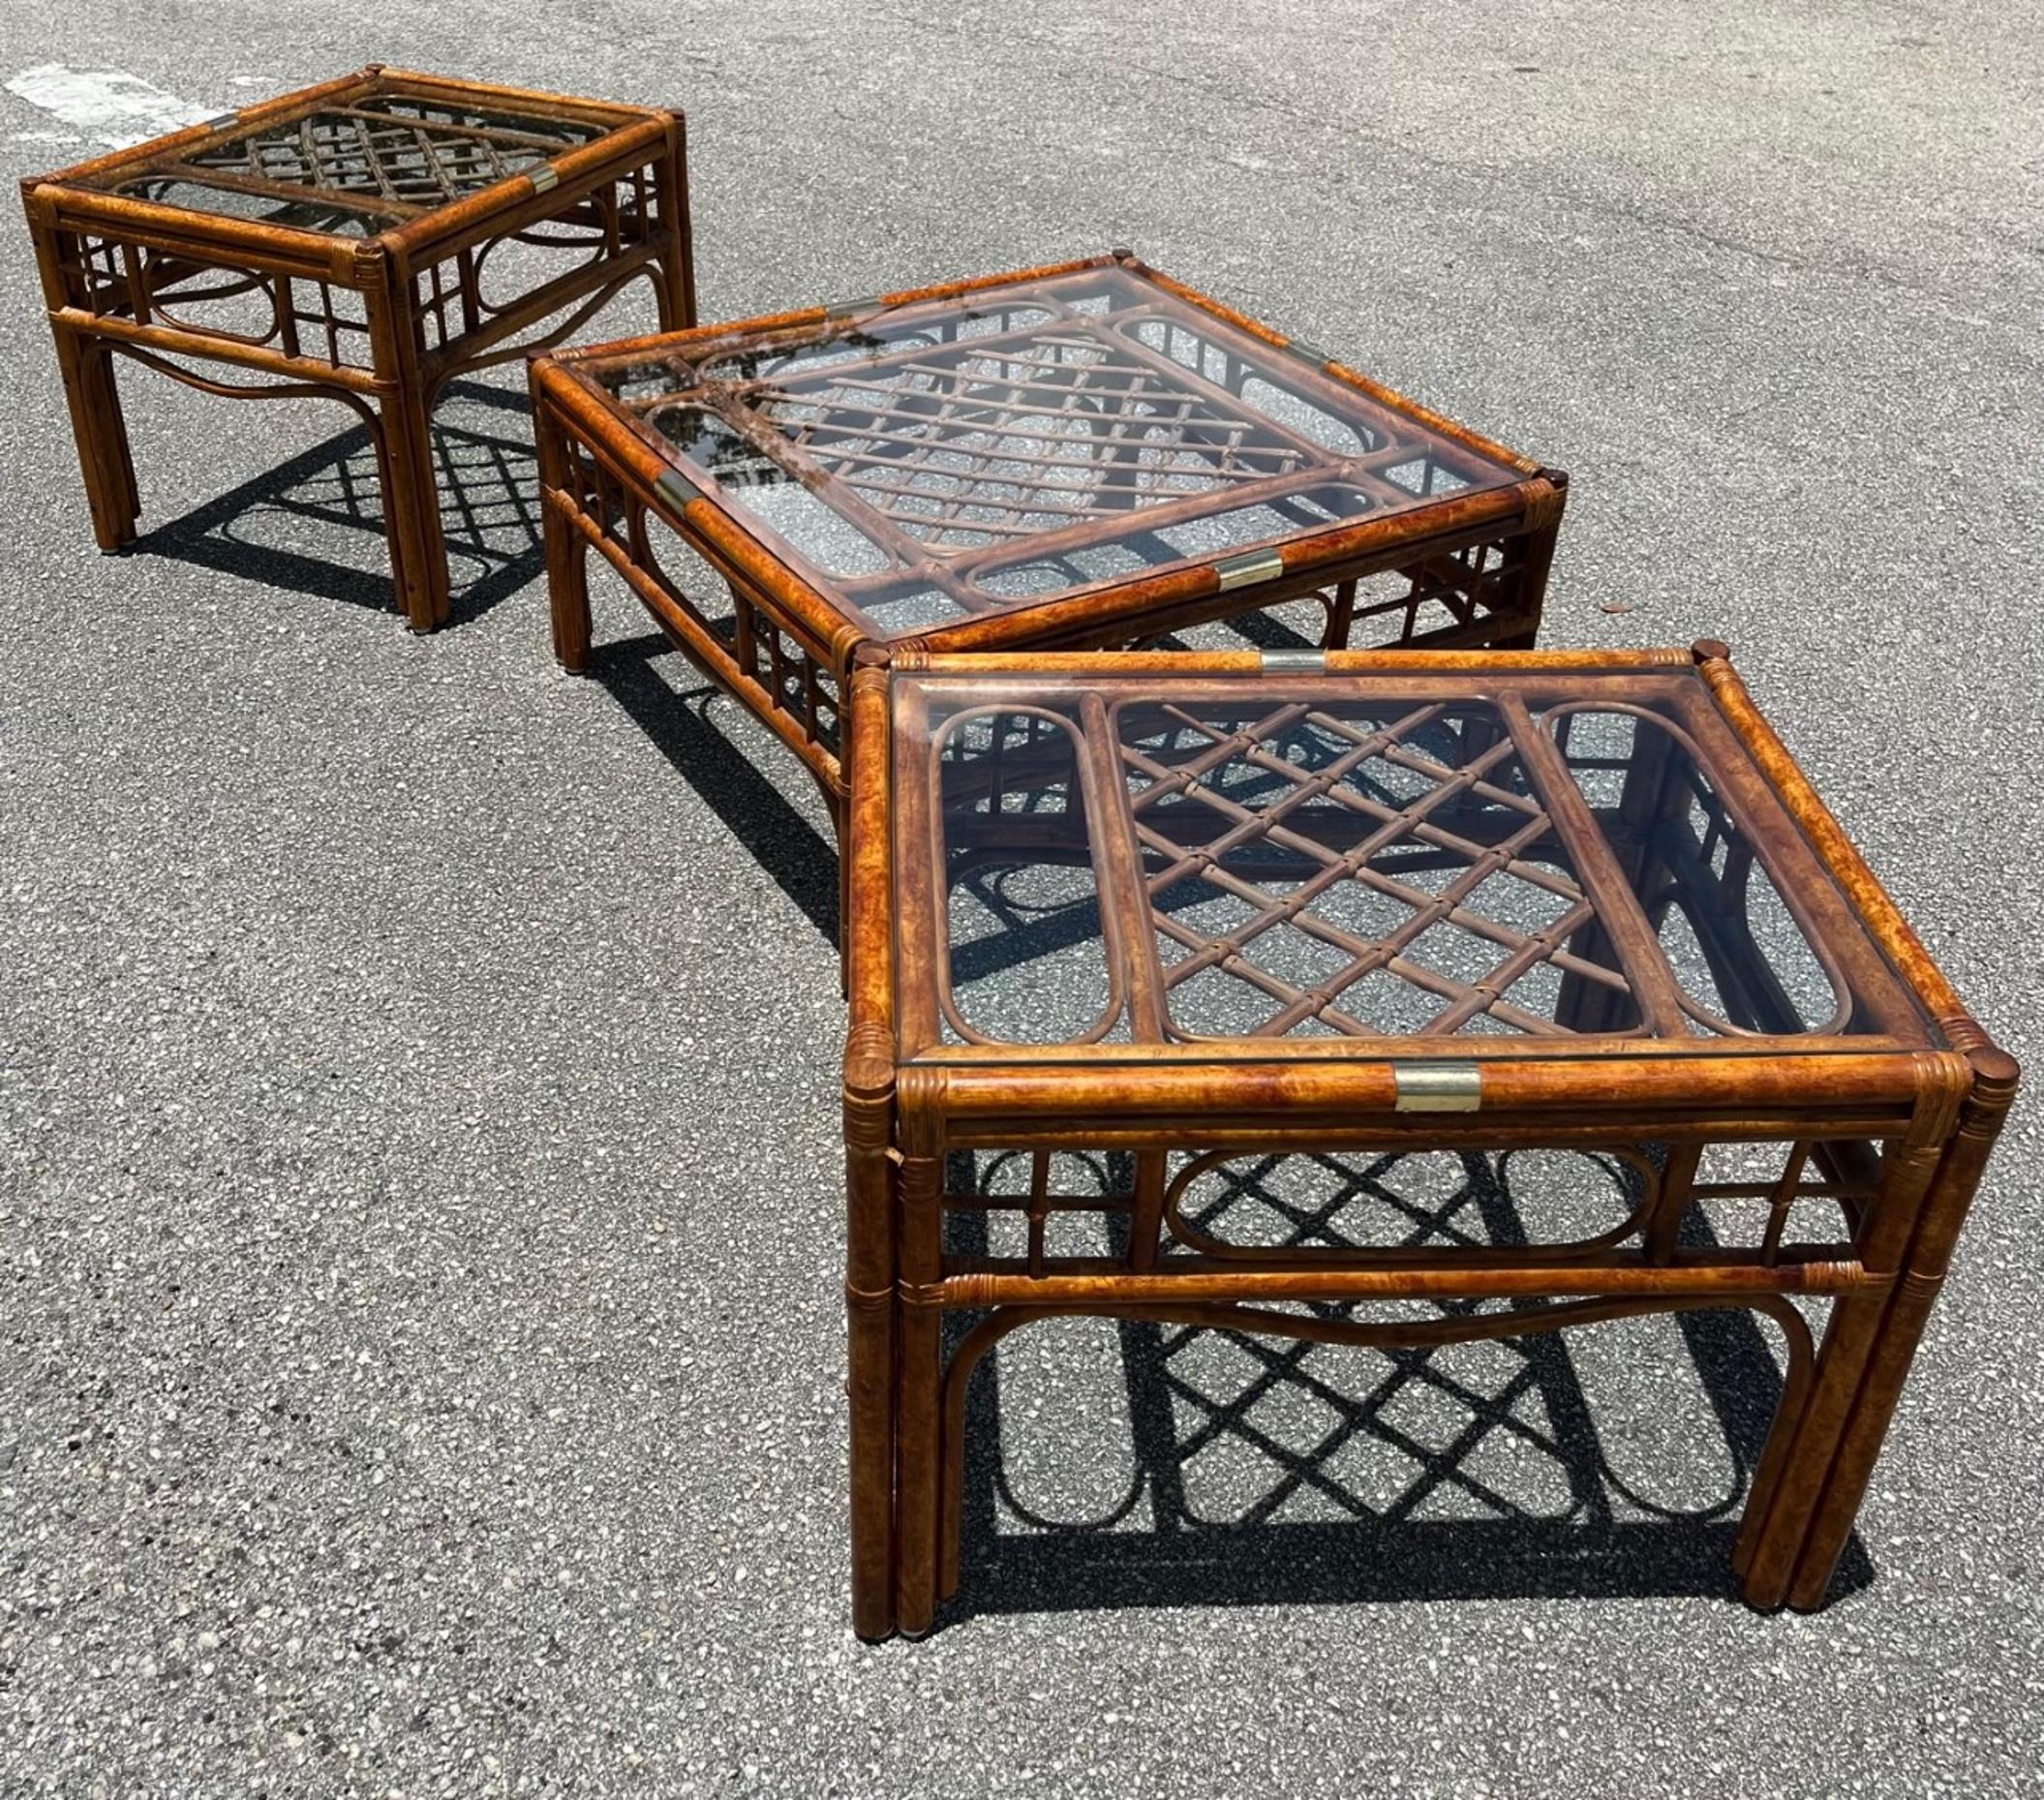 Franco Albini Style Bamboo Rattan Set of 3, Coffee and Side Tables

Stunning set of 3 bamboo rattan tables with glass tops (2 side tables and 1 coffee table). The 3 pieces feature a beautiful tortoiseshell burnt bamboo frame. Inspired by Franco